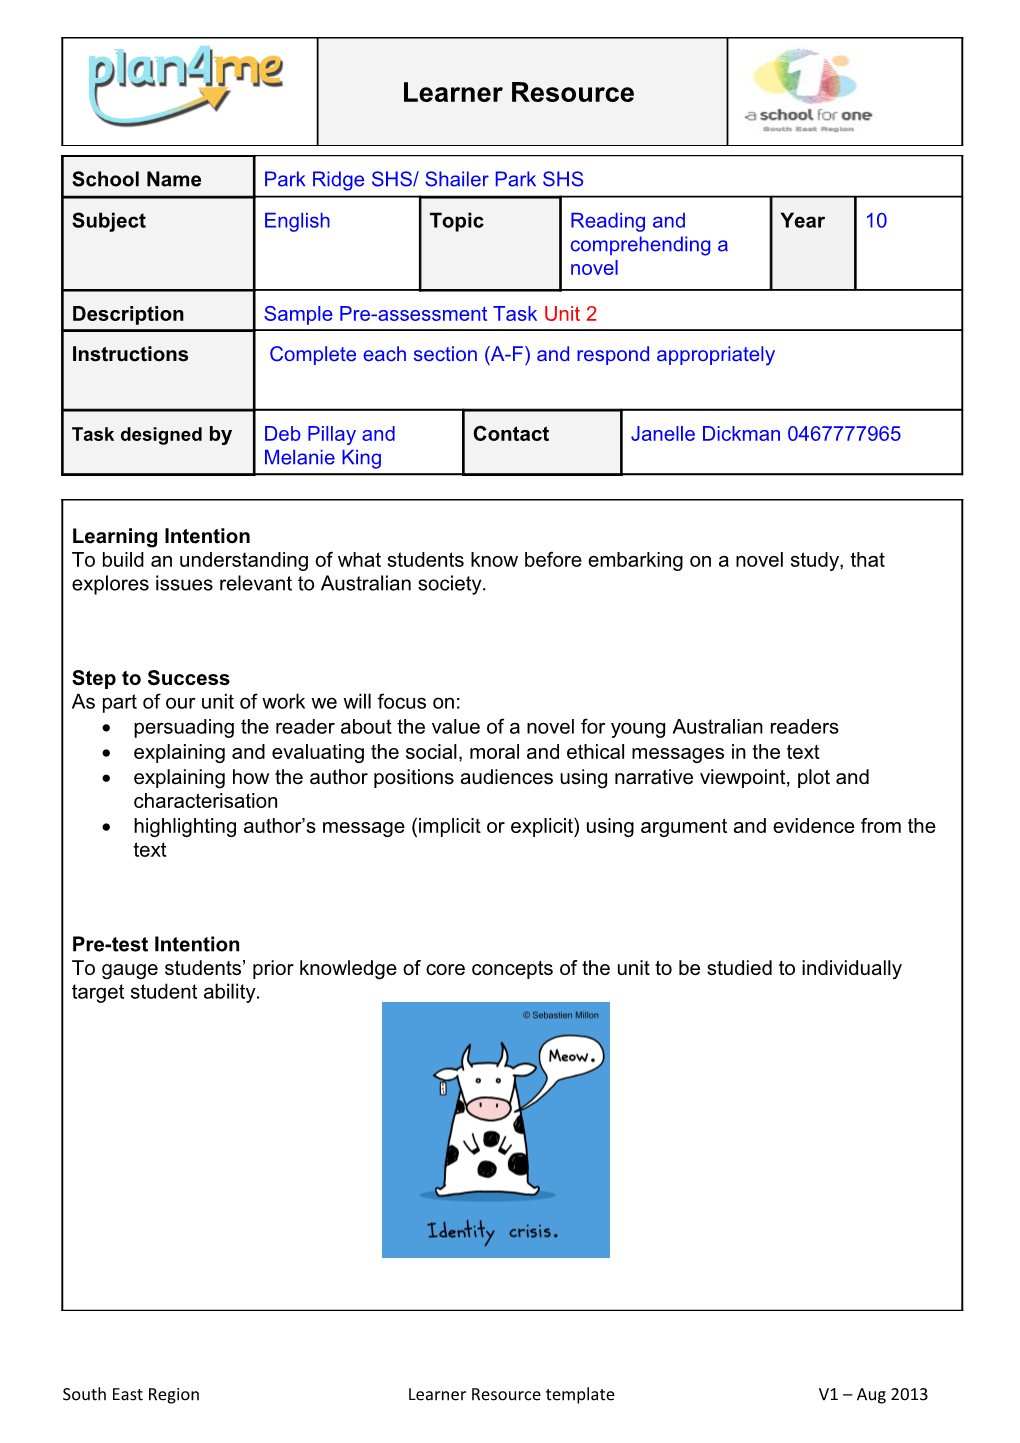 South East Region Learner Resource Template V1 Aug 2013 s1